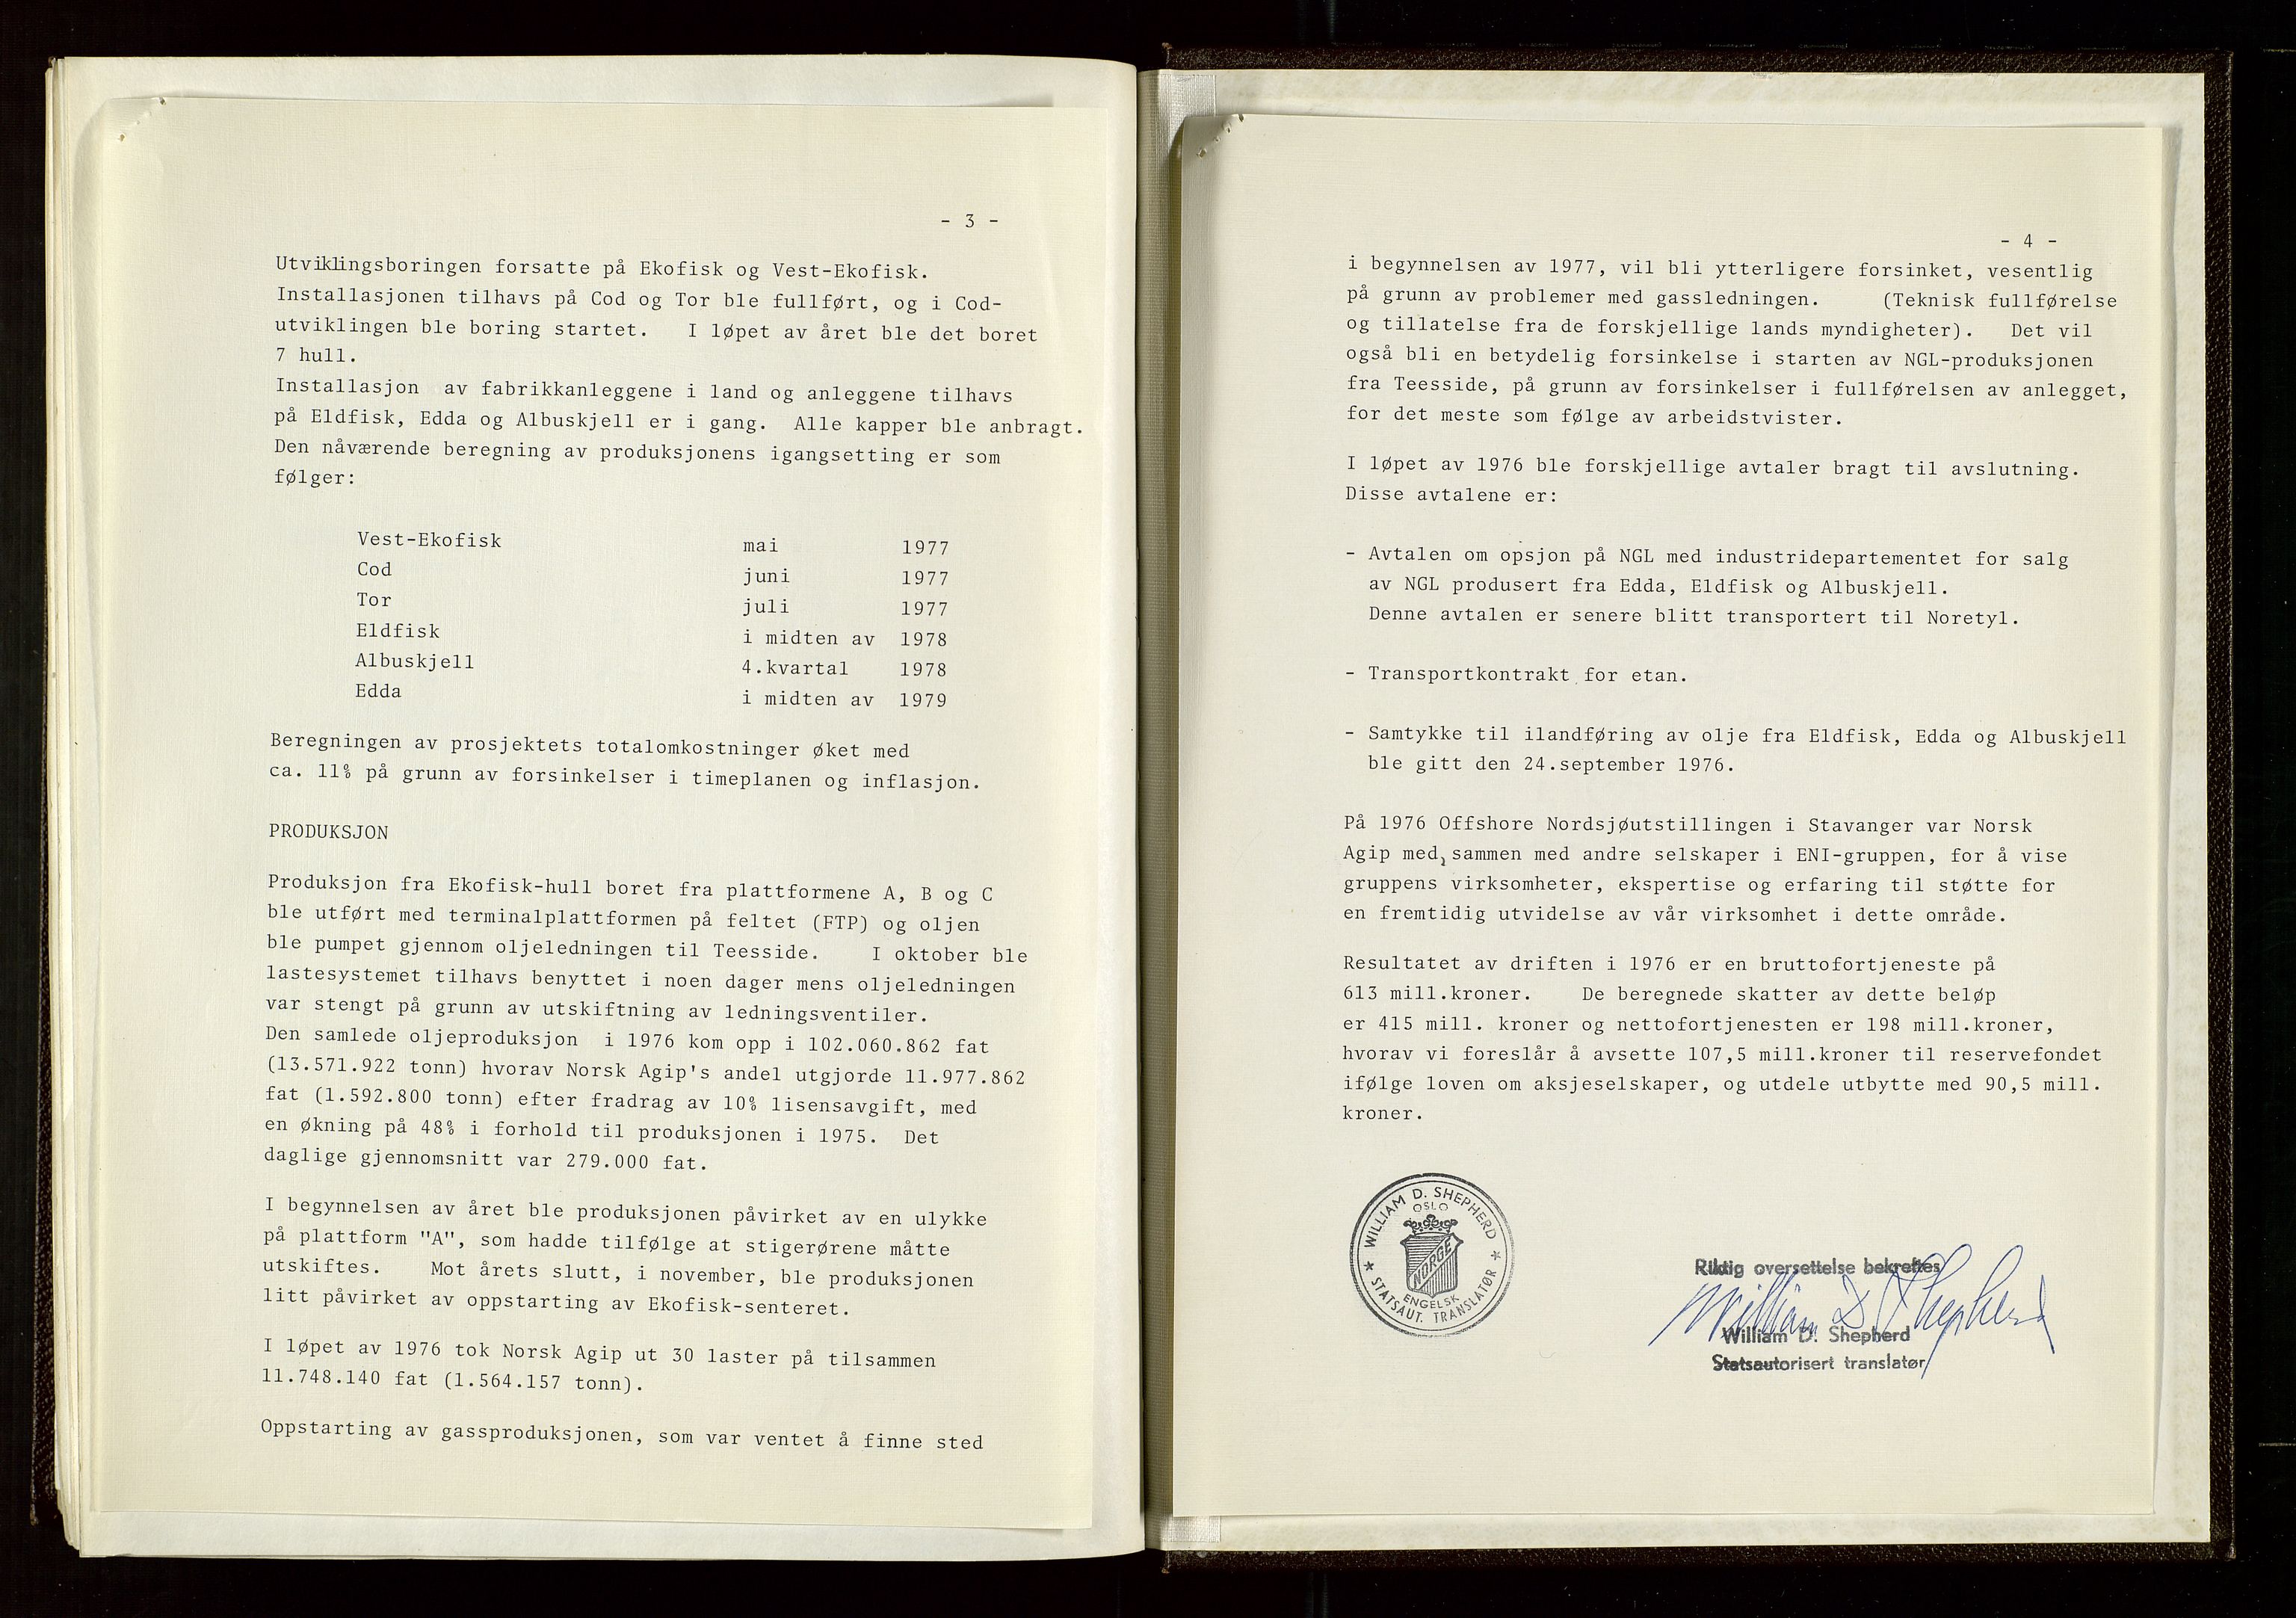 Pa 1583 - Norsk Agip AS, SAST/A-102138/A/Aa/L0002: General assembly and Board of Directors meeting minutes, 1972-1979